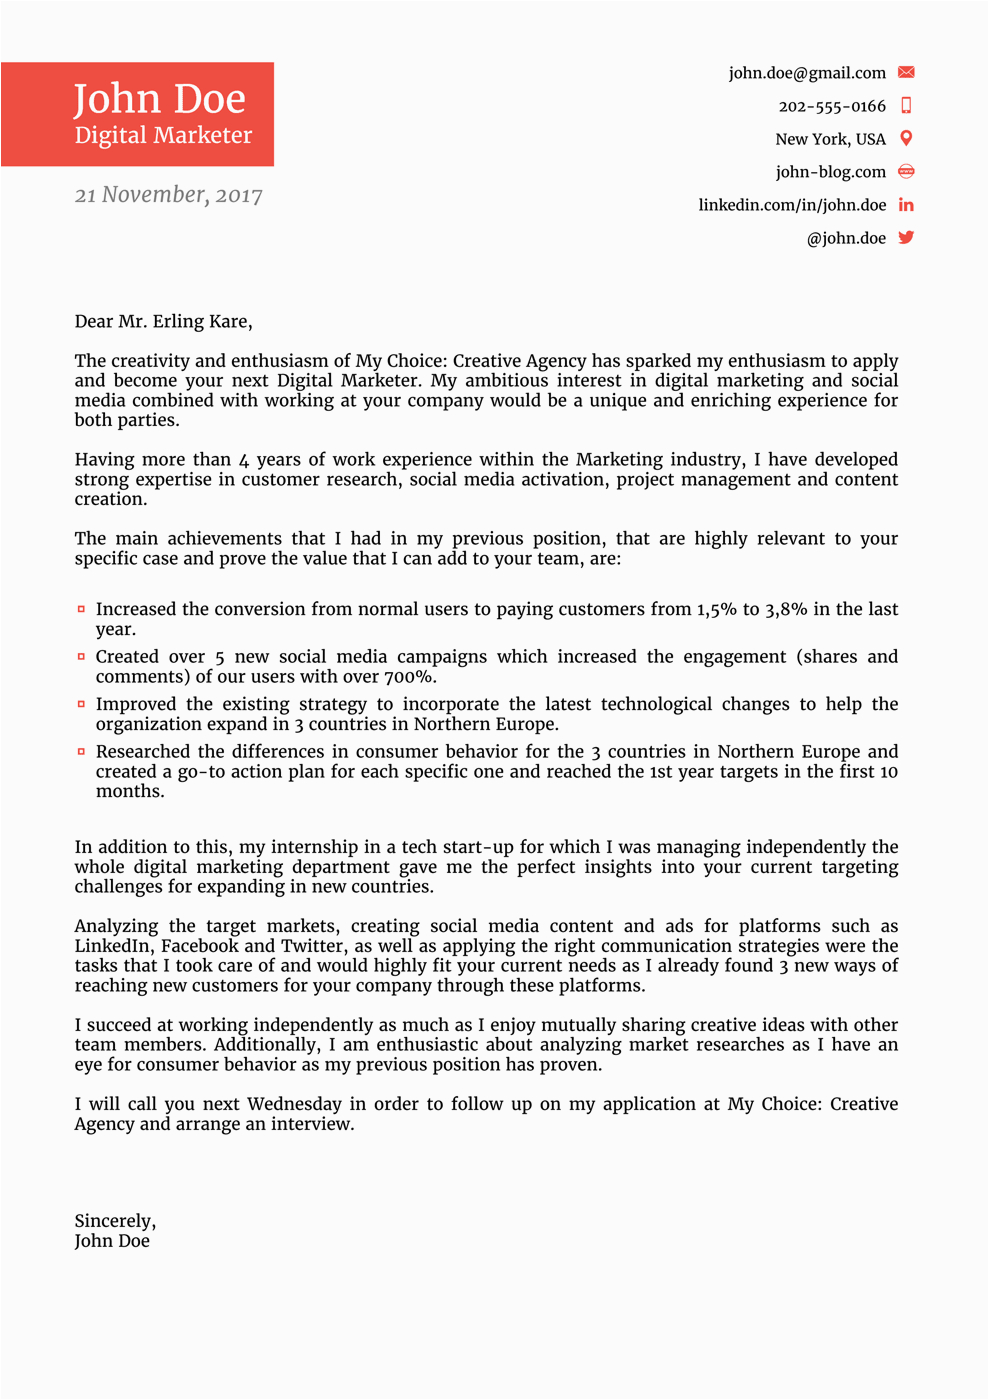 Sample Cover Letter for A Functional Resume 8 Cover Letter Templates for Any Field [updated 2021]